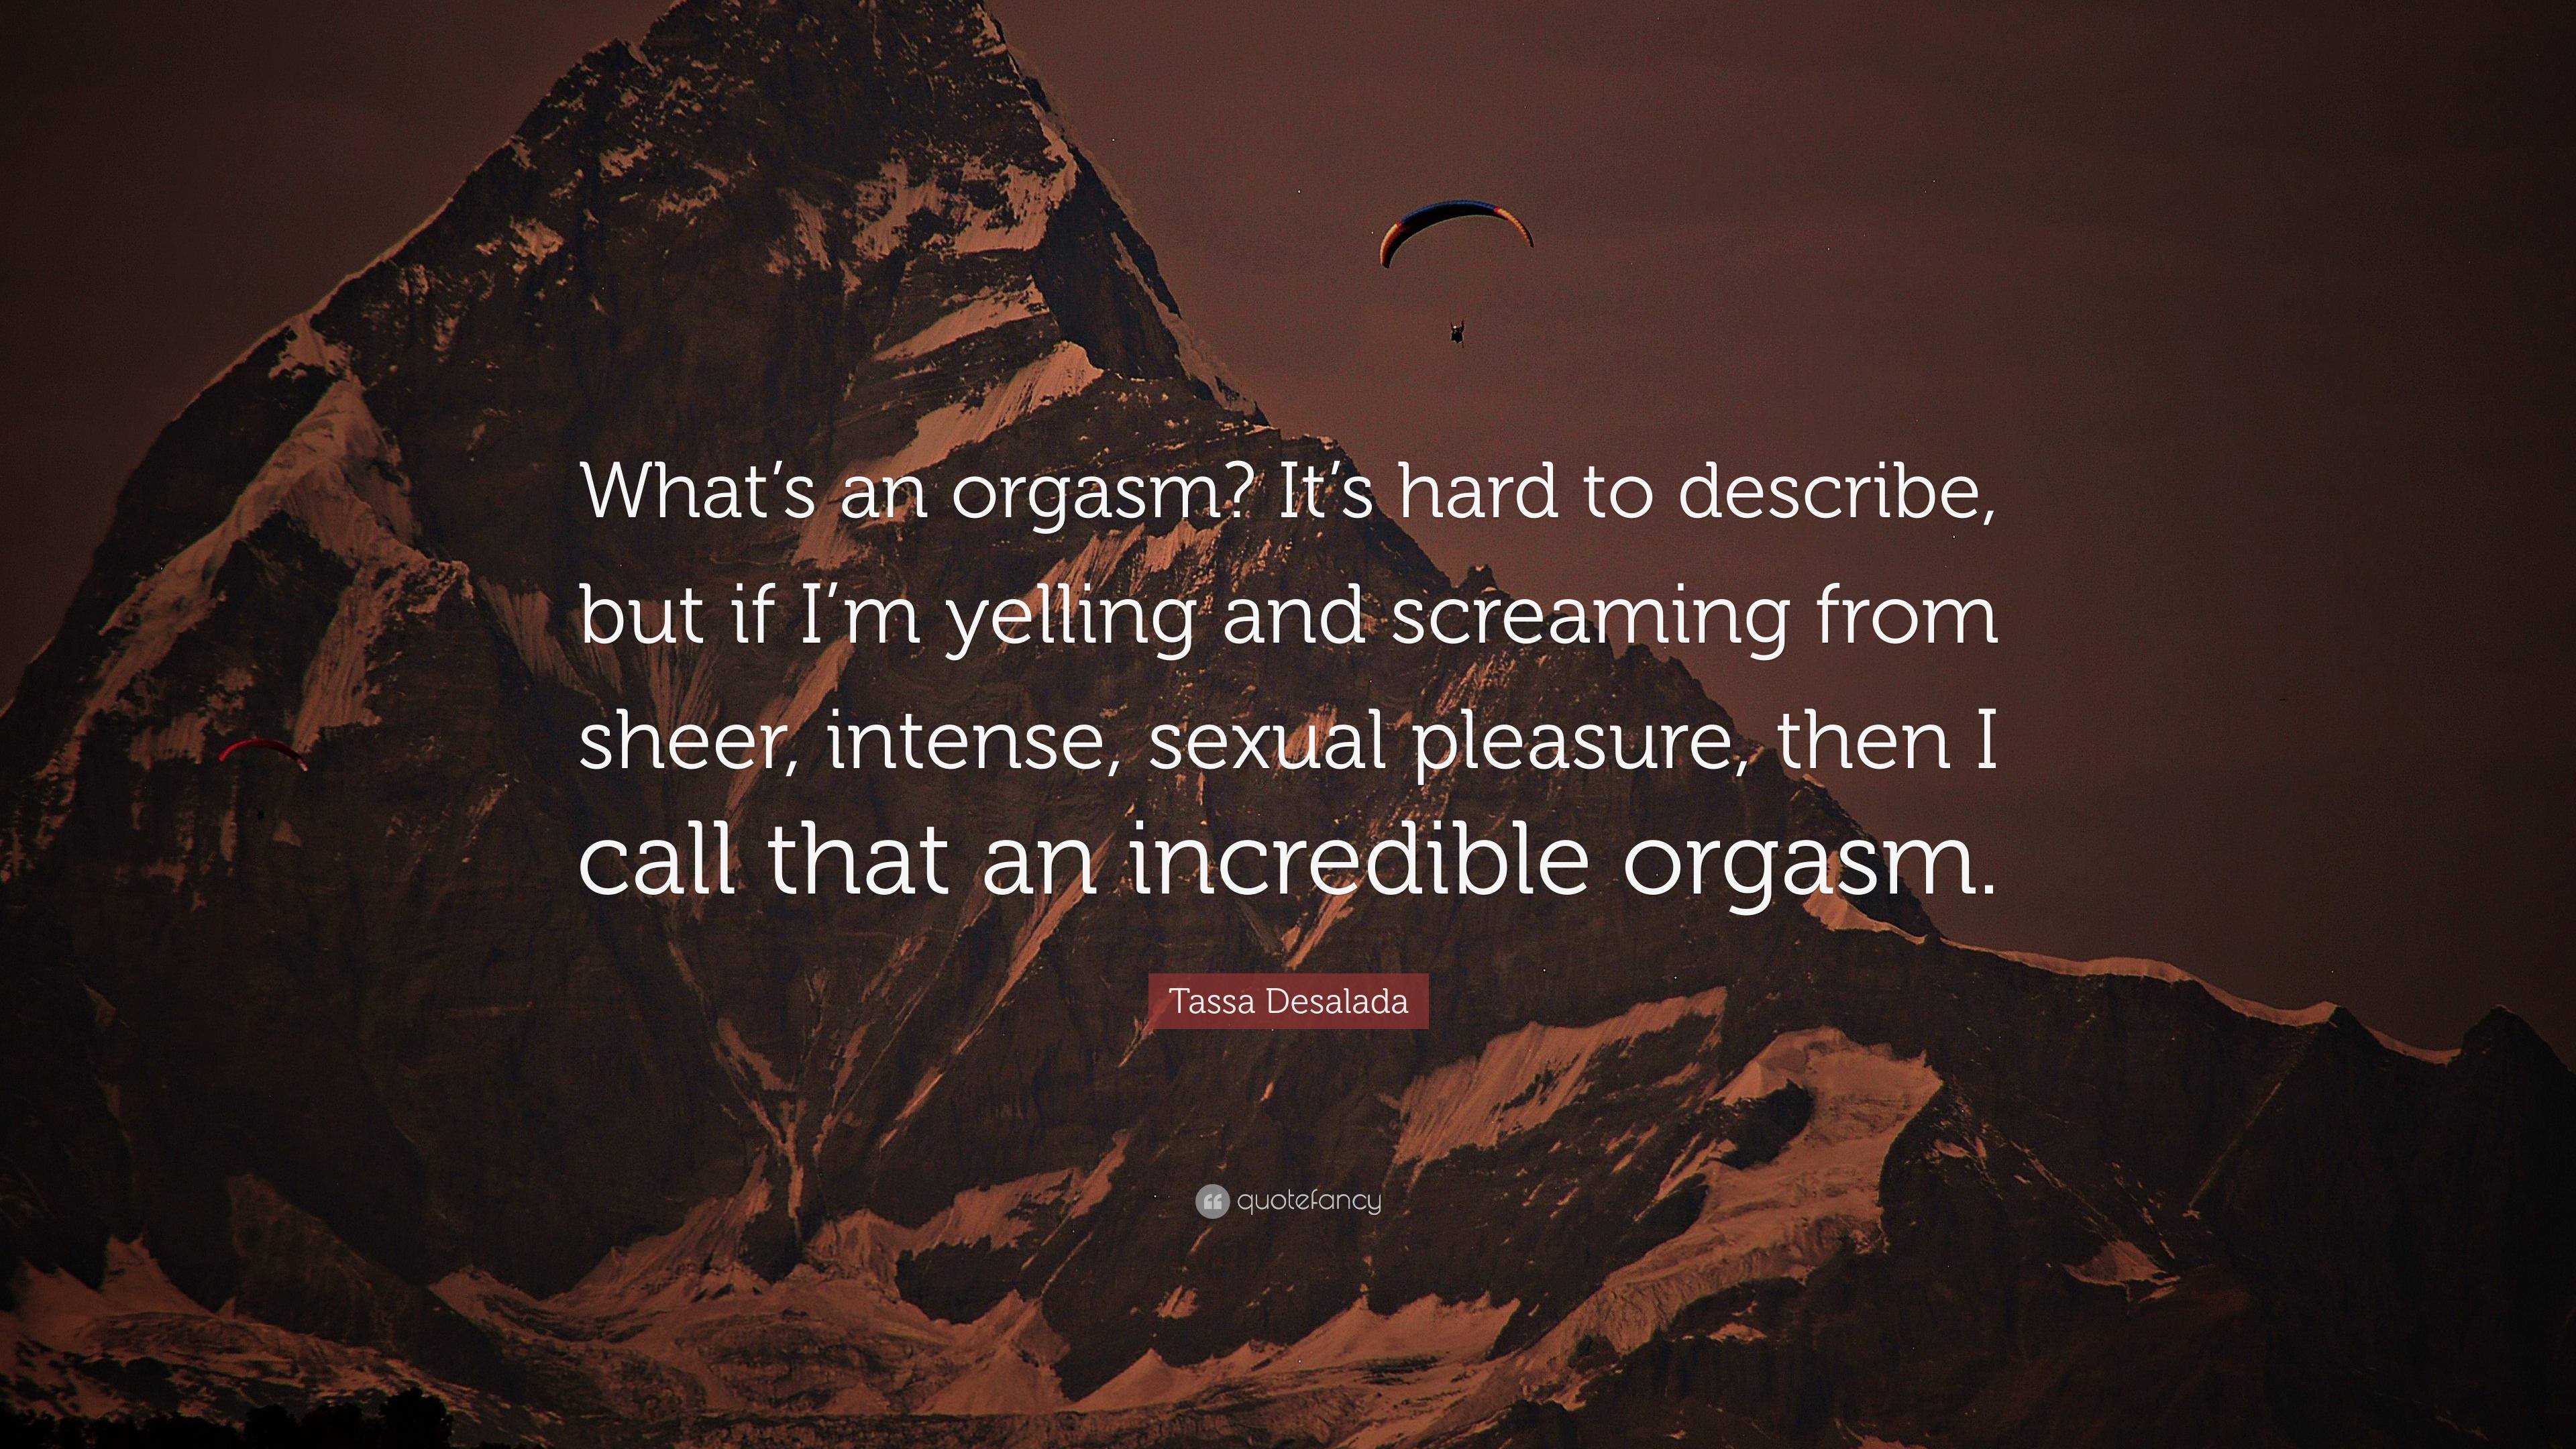 Tassa Desalada Quote “Whats an orgasm? Its hard to describe, but if Im yelling and screaming from sheer, intense, sexual pleasure, then I c...” pic image